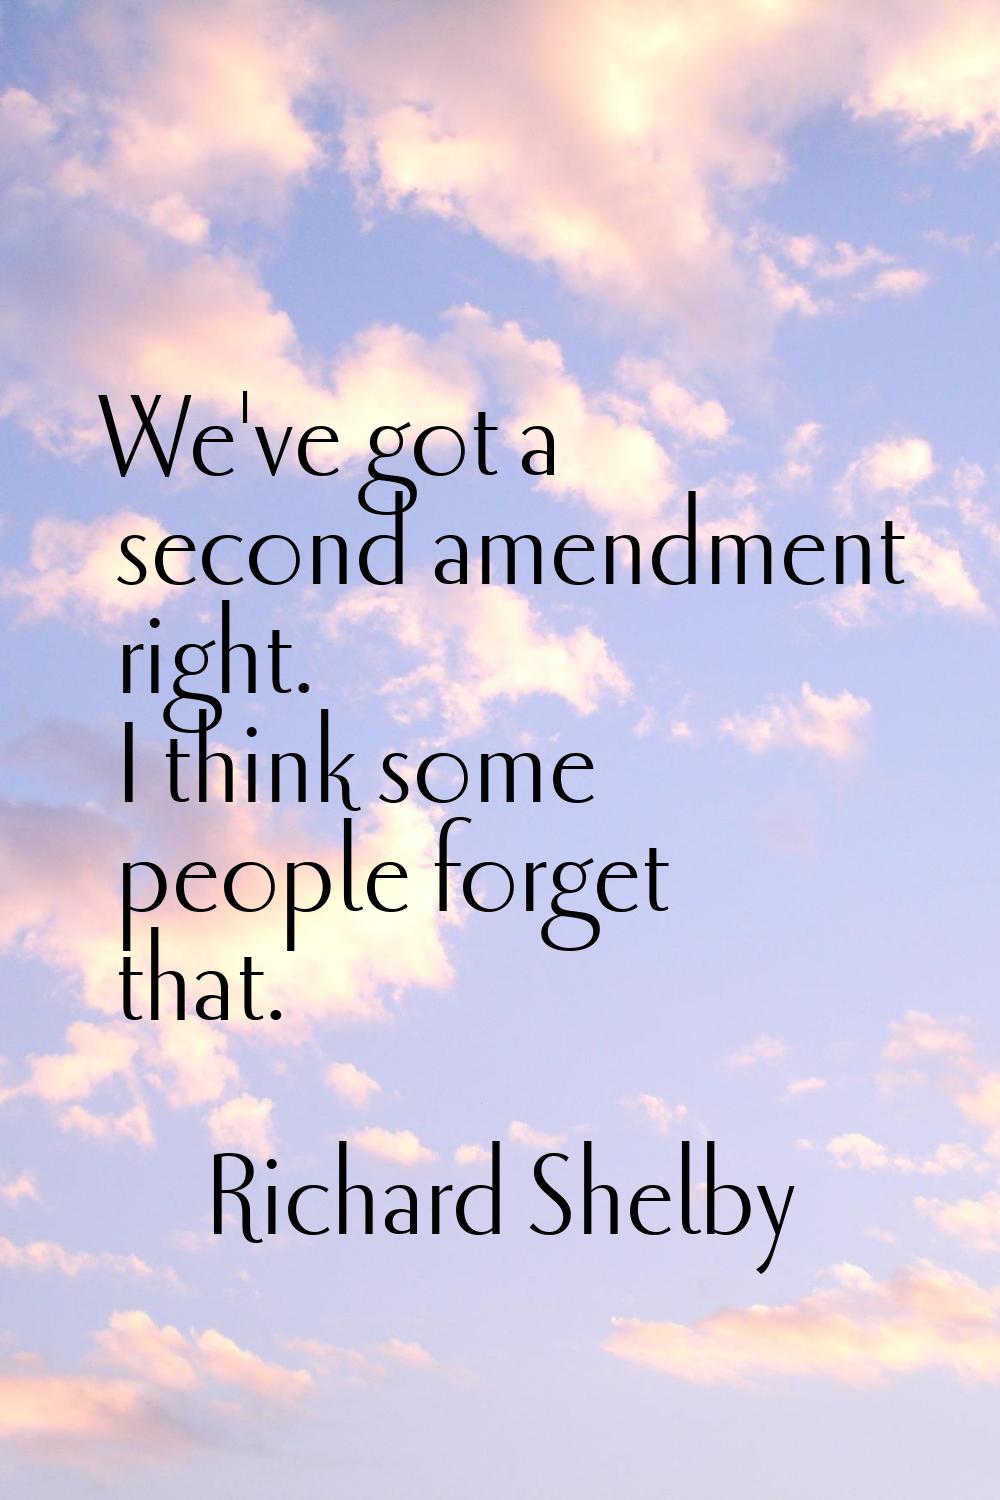 We've got a second amendment right. I think some people forget that.